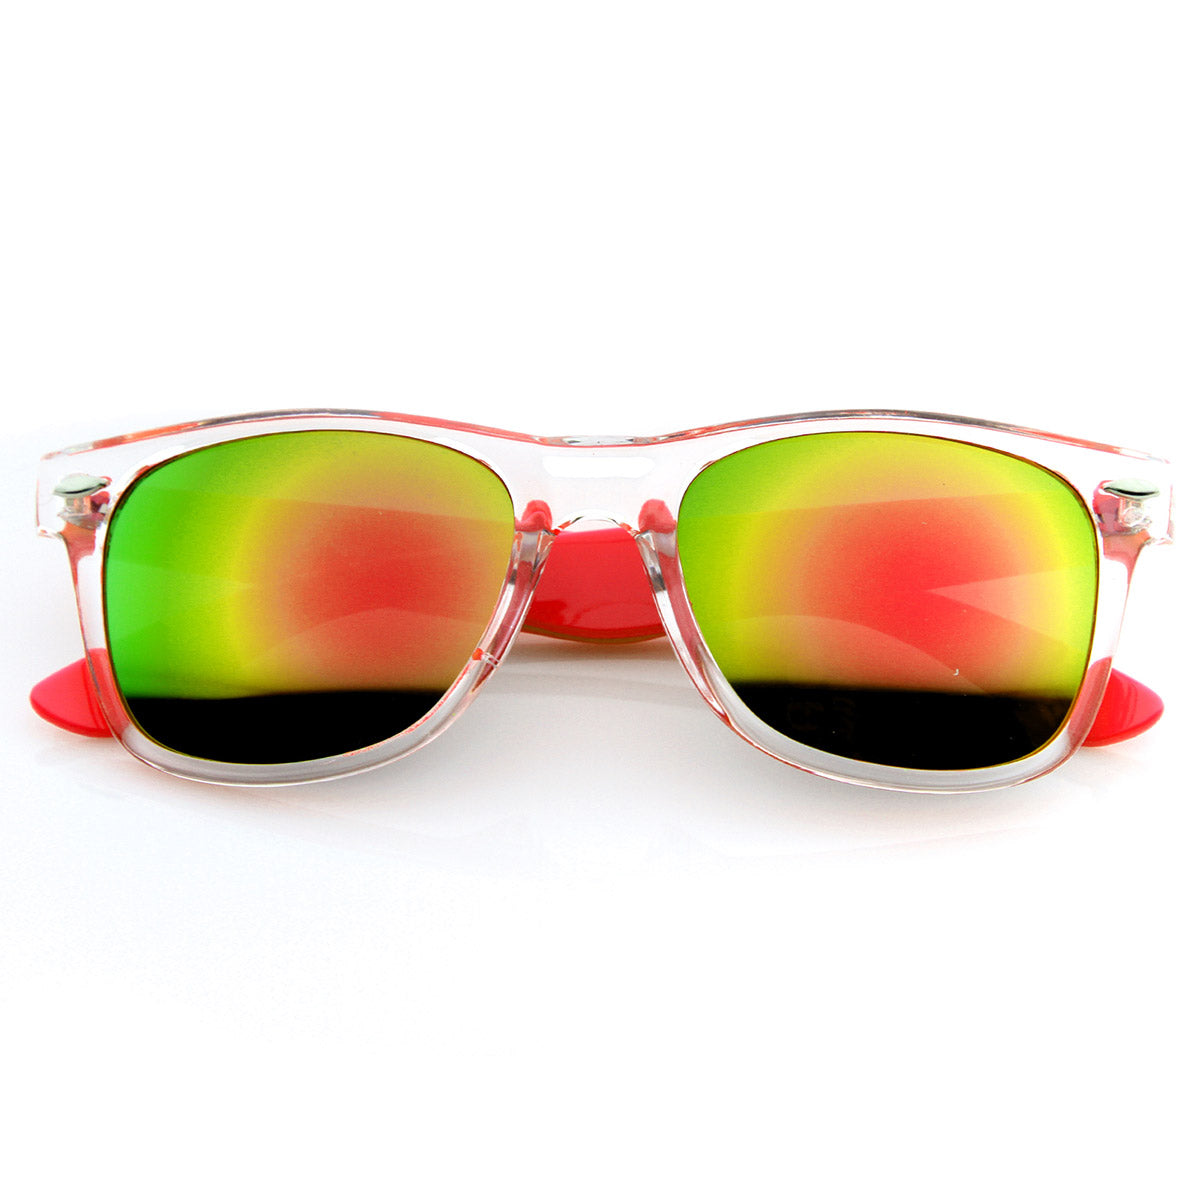 Bright Two-Tone Transluscent Acetate Horn Rimmed Sunglasses w/ Color Mirror Lens, Green